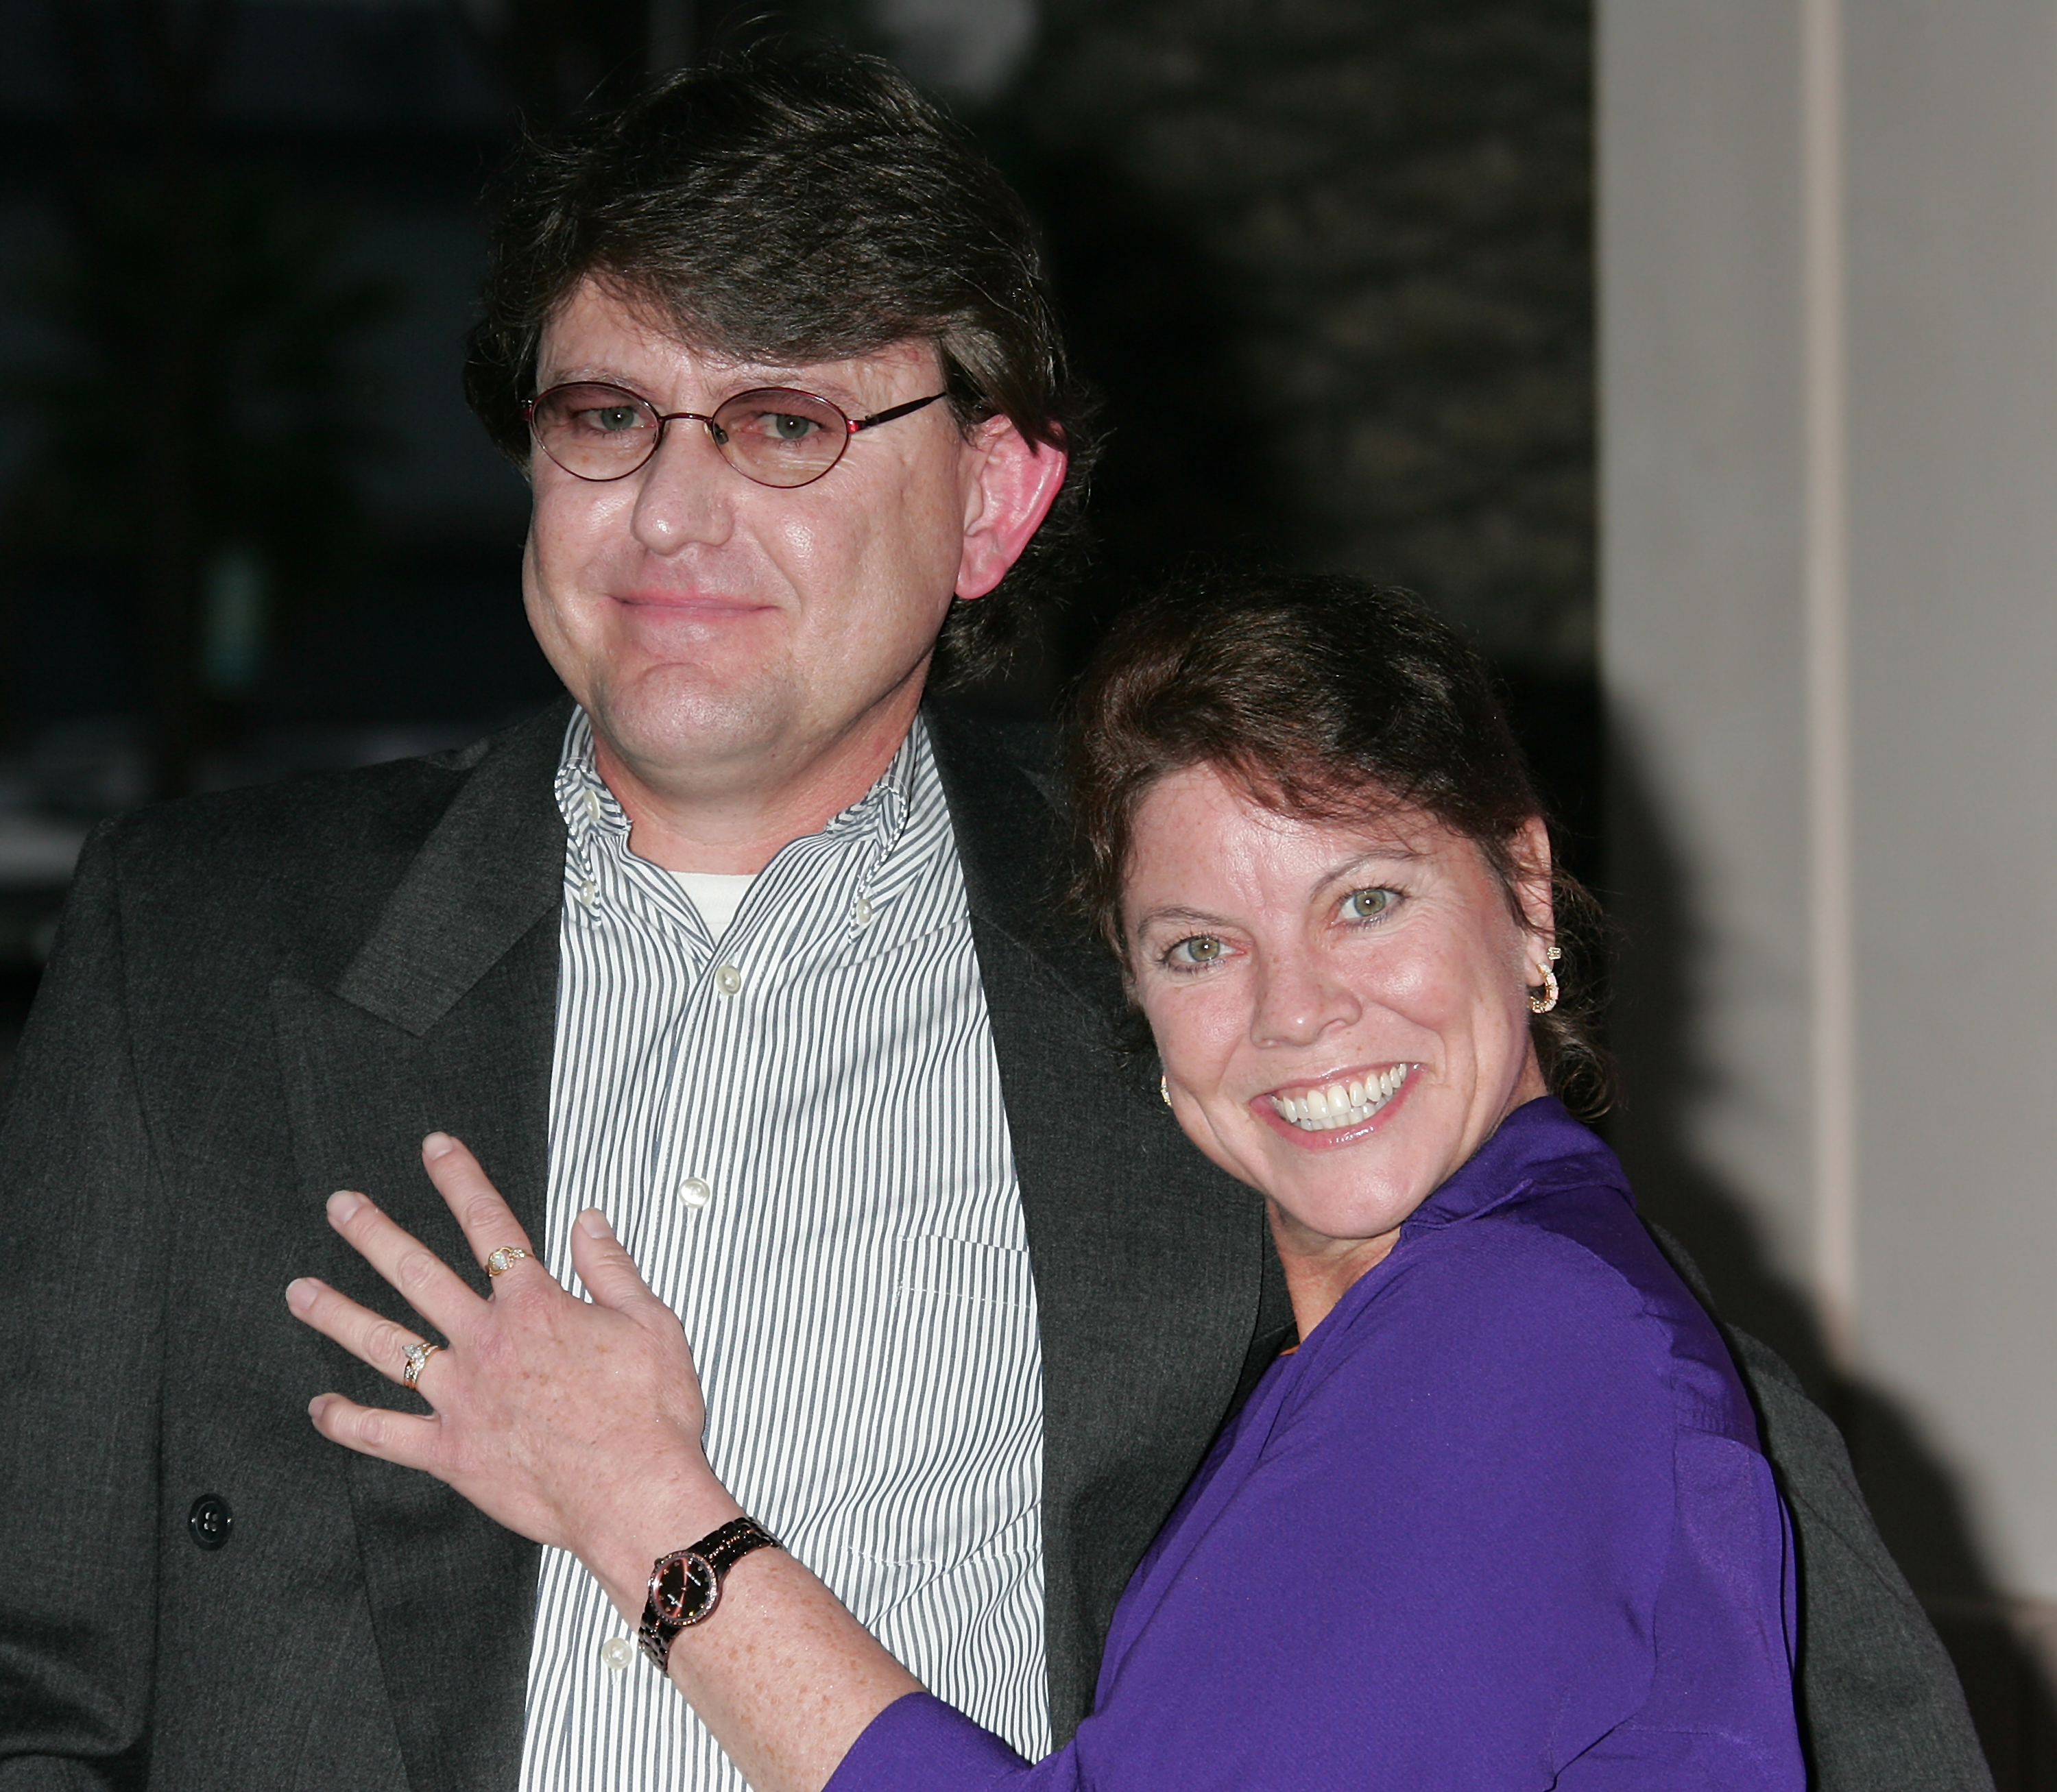 Steven Fleischmann and Erin Moran in Hollywood in 2008 | Source: Getty Images